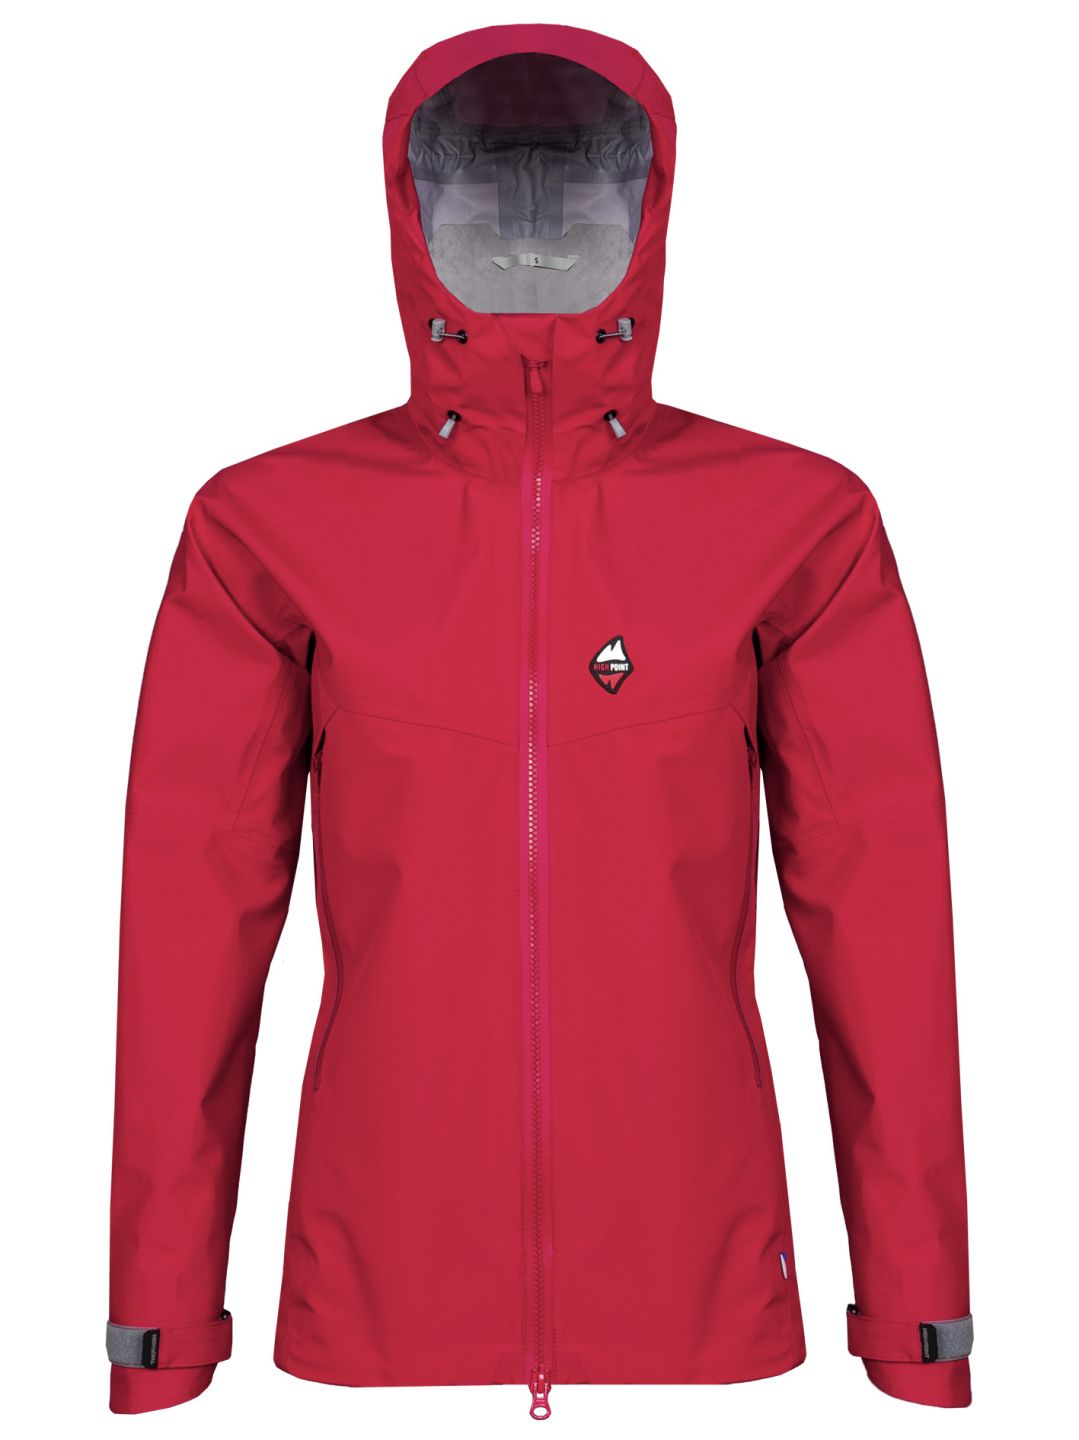 HIGH POINT EXPLOSION 6.0 Lady jacket Red varianta: L